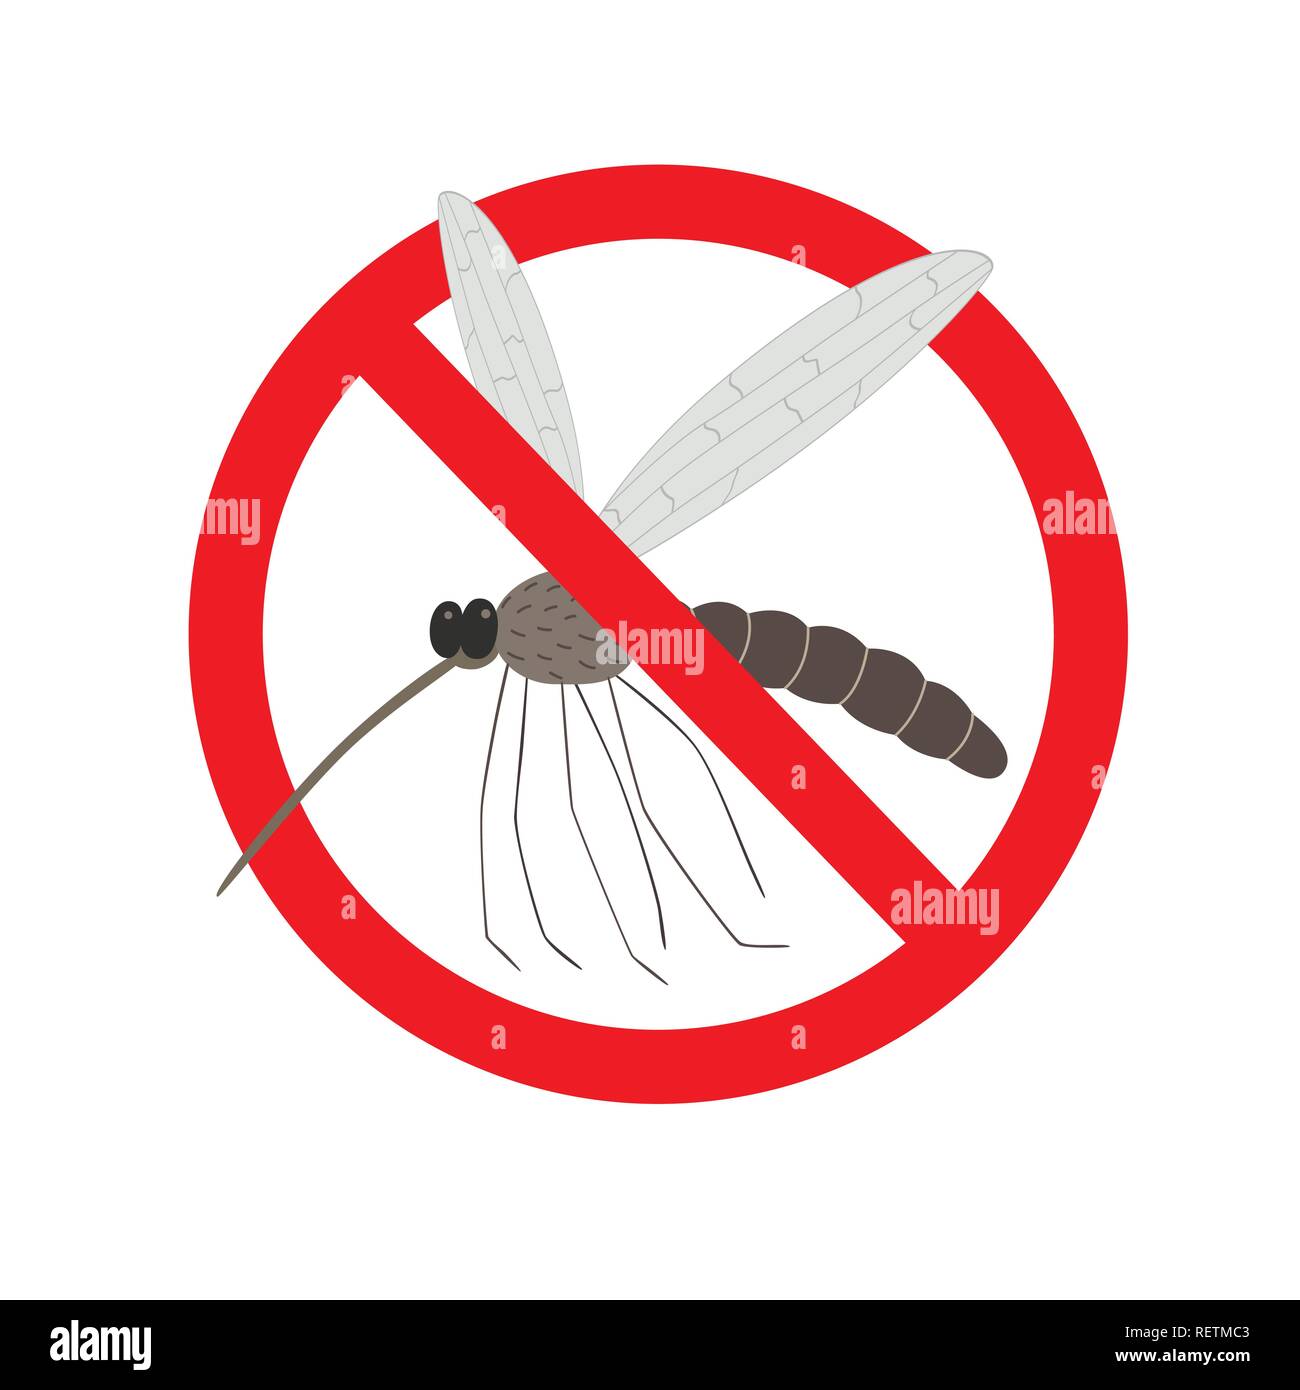 Wild mosquito in red strike-through circle. Vector illustration on white isolated background. Stock Vector